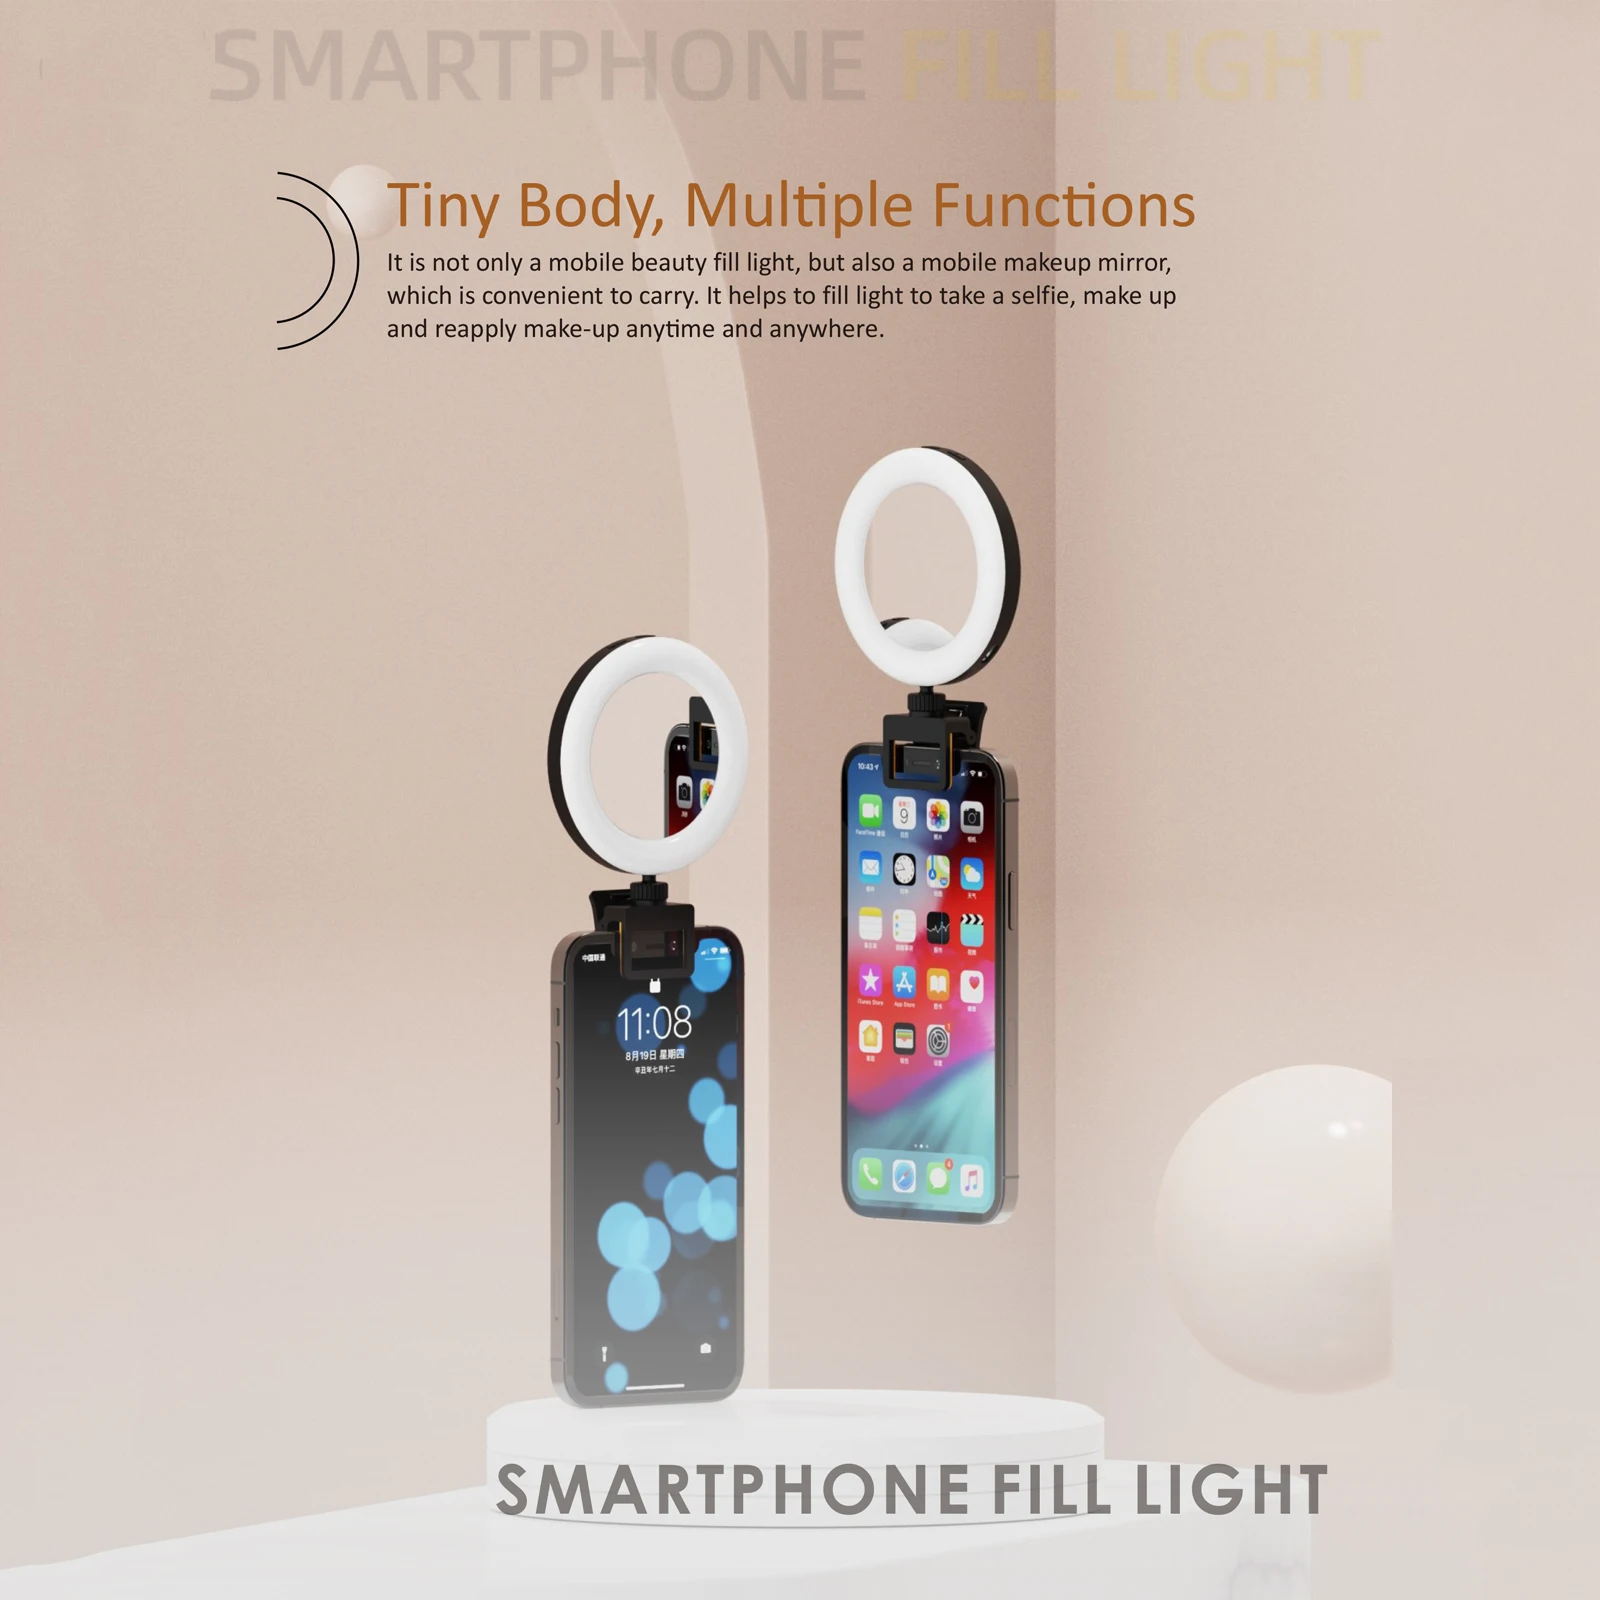 LED Selfie Ring Light With 600mA Rechargeable Battery 3 Color Temperature 7 Levels Of Brightness Mobile Phone Fill Light